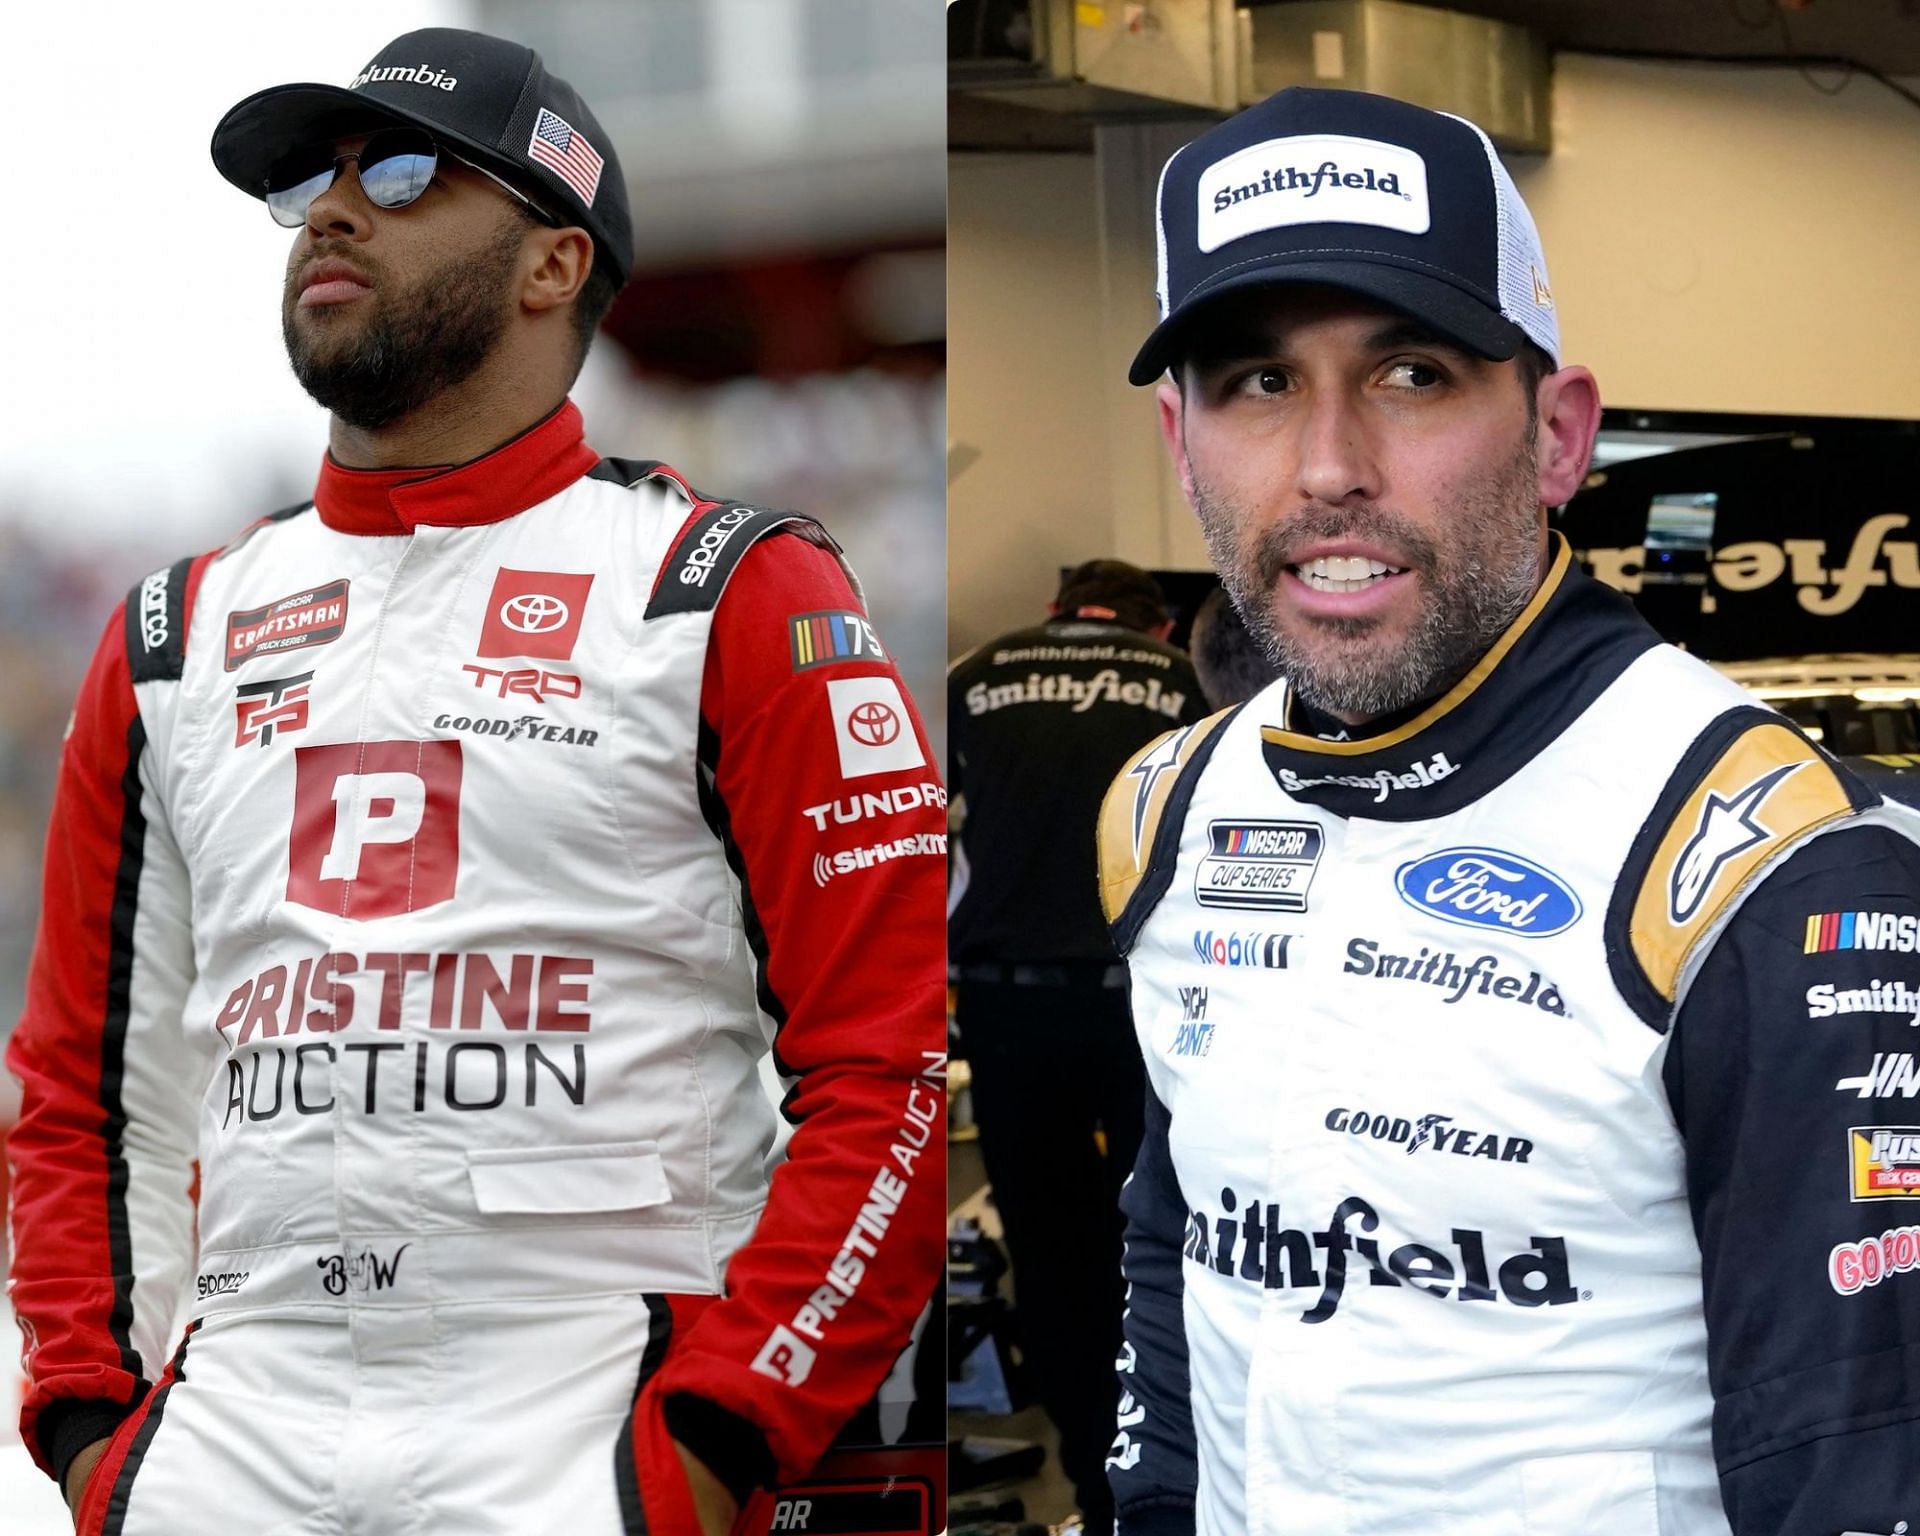 Bubba Wallace (L) and Aric Almirola (R)